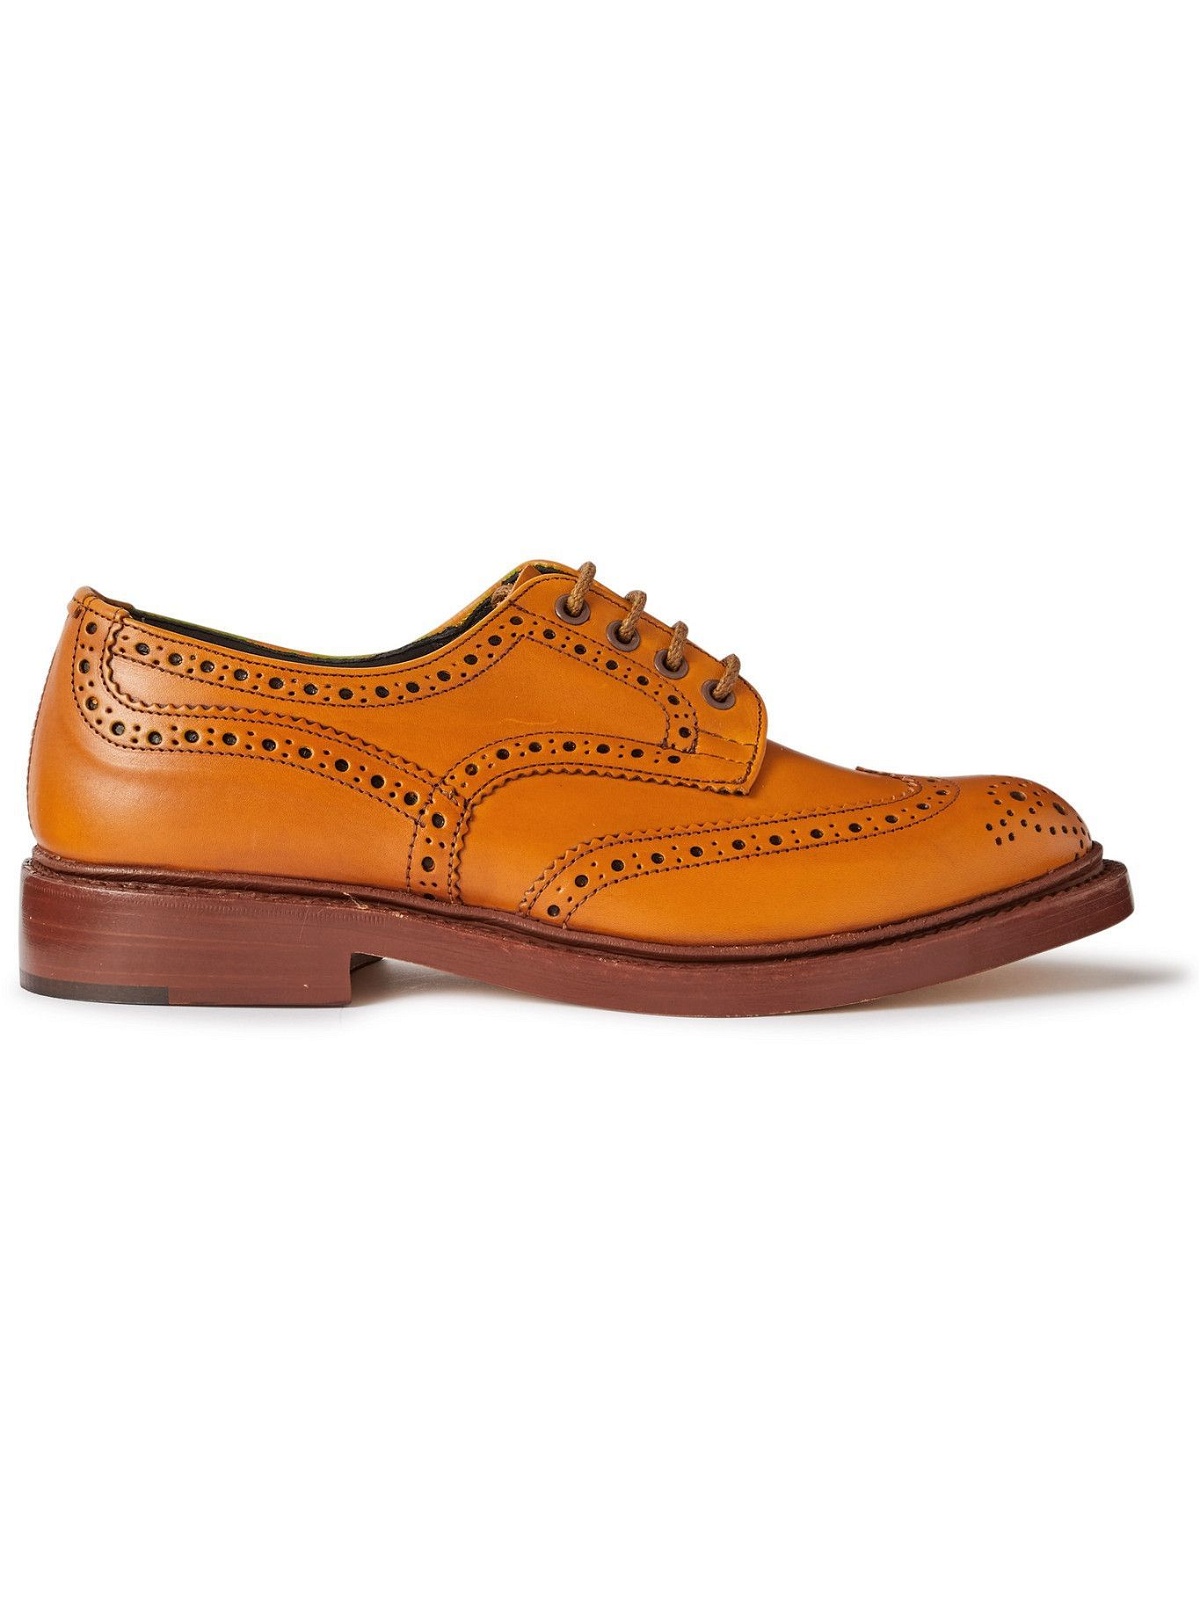 Tricker's - Bourton Country Leather Brogues - Brown Tricker's